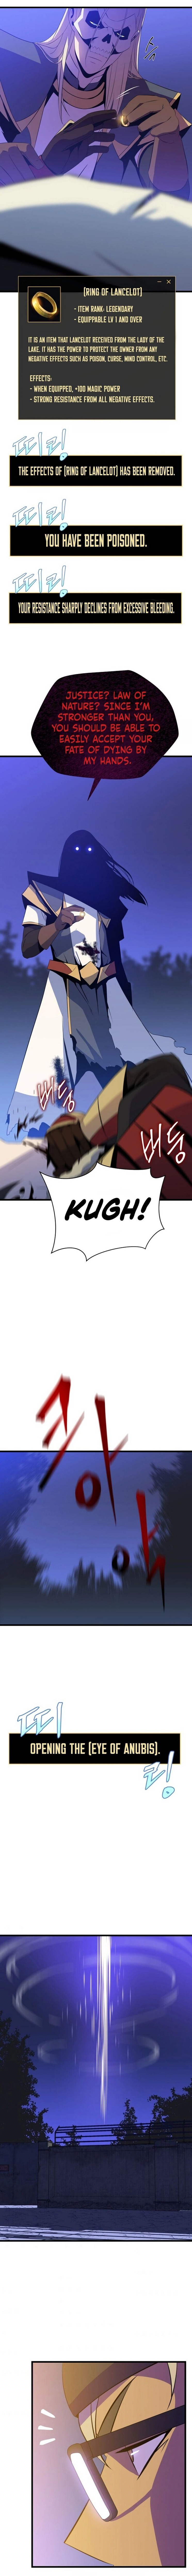 Kill The Hero - Chapter 53 Page 15